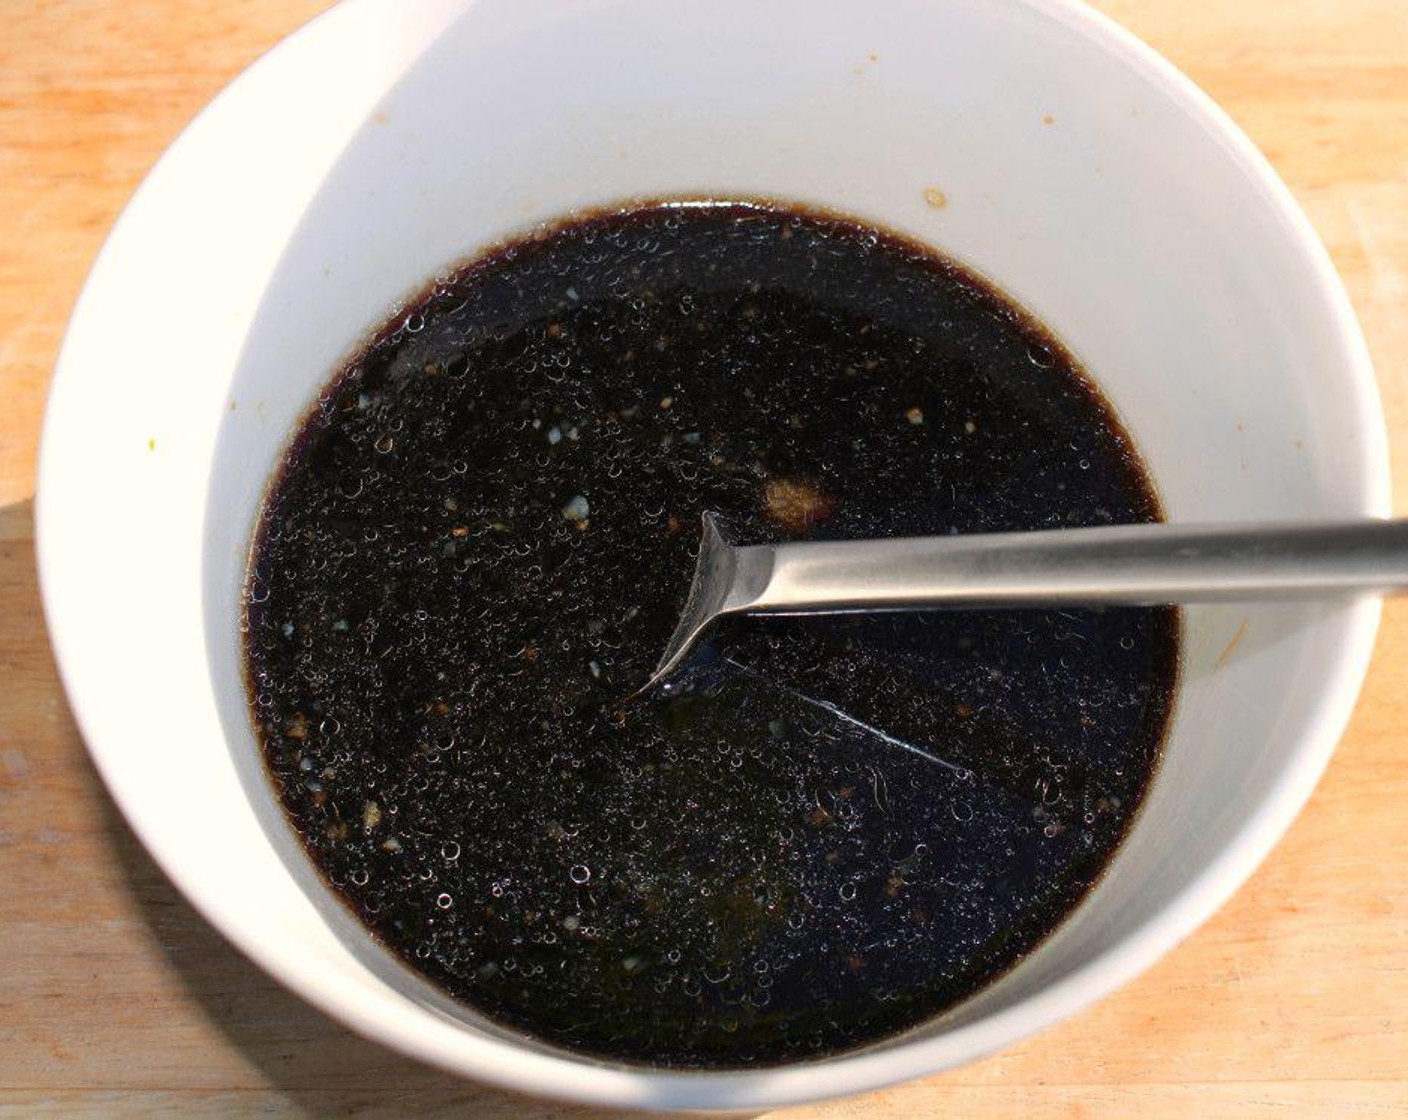 step 5 Combine Oyster Sauce (1 cup), Soy Sauce (1 cup), Chicken Stock (1 cup), Grated Ginger, Garlic Paste (1 tsp), Chili Oil (1 tsp), Brown Sugar (1 tsp), and Chili Paste (1 tsp). Mix well.